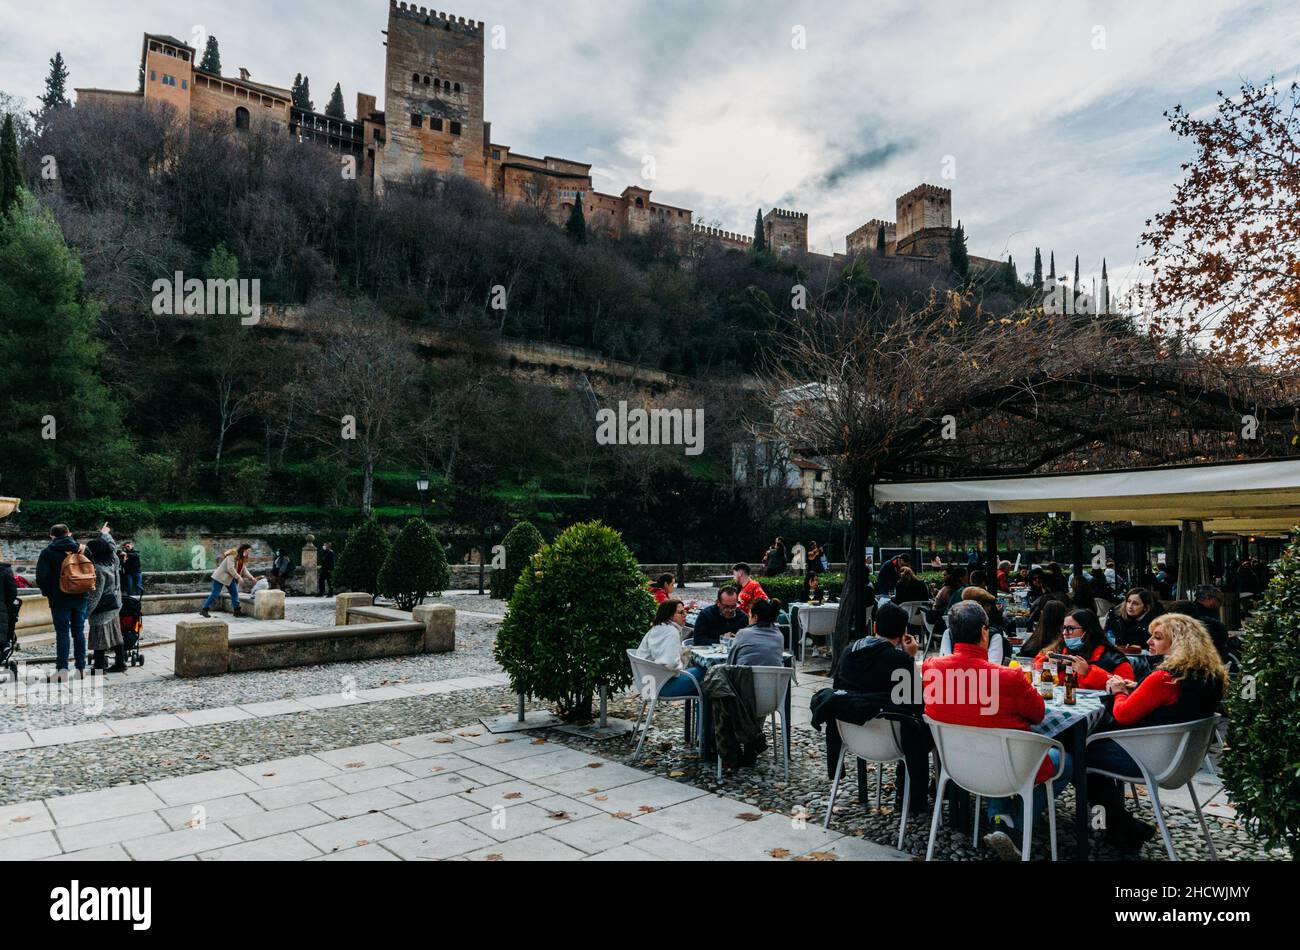 Granada, Spain - December 26, 2021: People dining out with the view of the Alhambra Palace in Granada, Spain Stock Photo